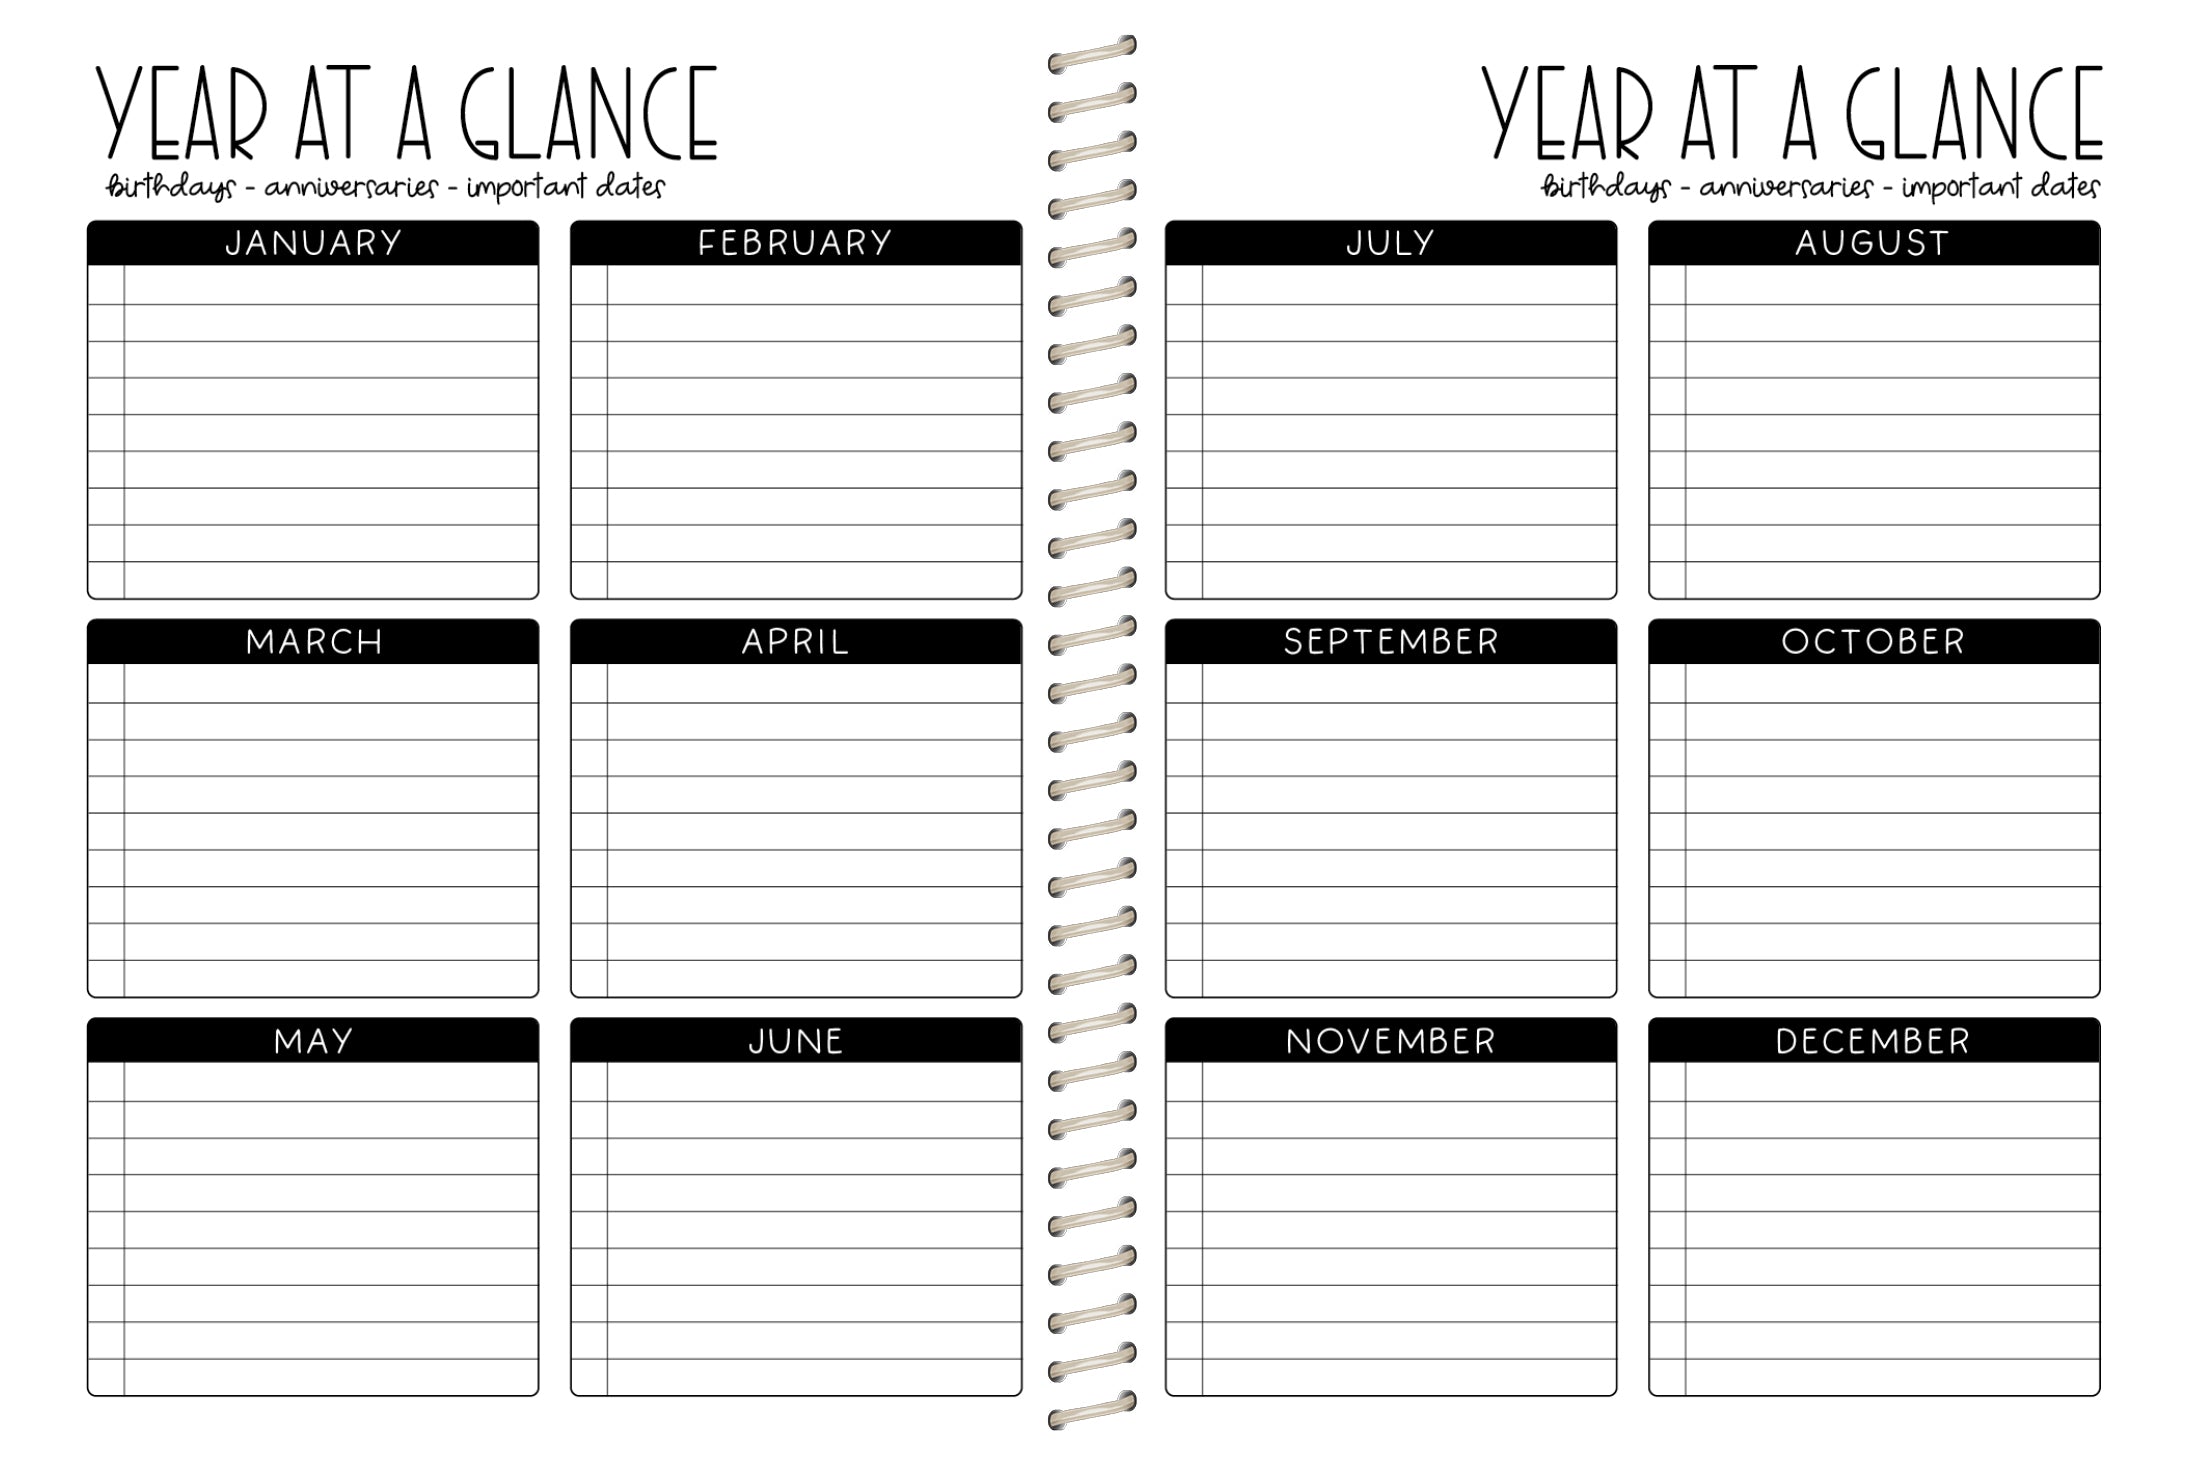 2024 Printed Weekly Planner - LEOPARD NAIL TECH